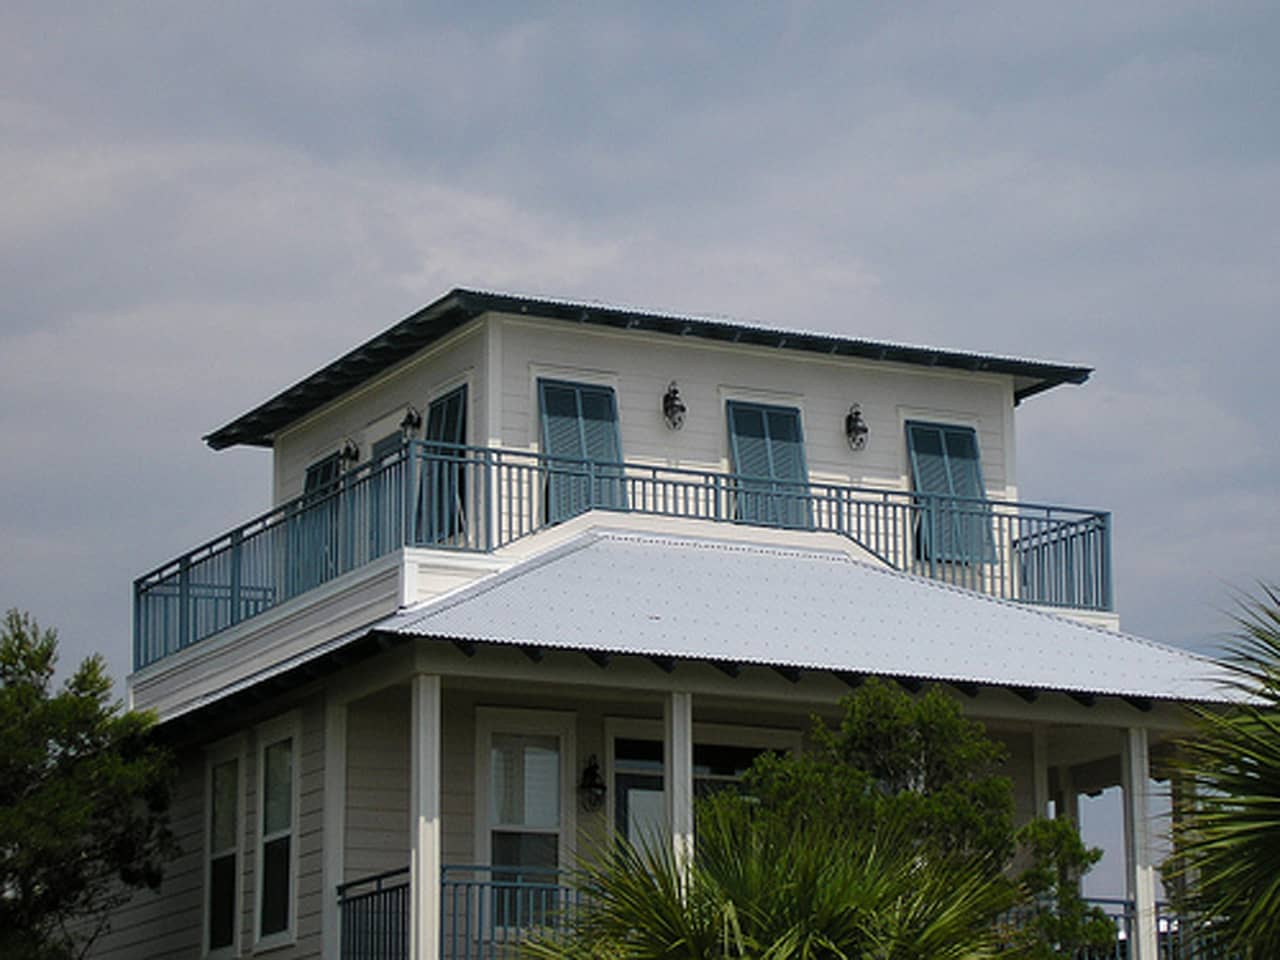 Bahama shutters on second floor of house